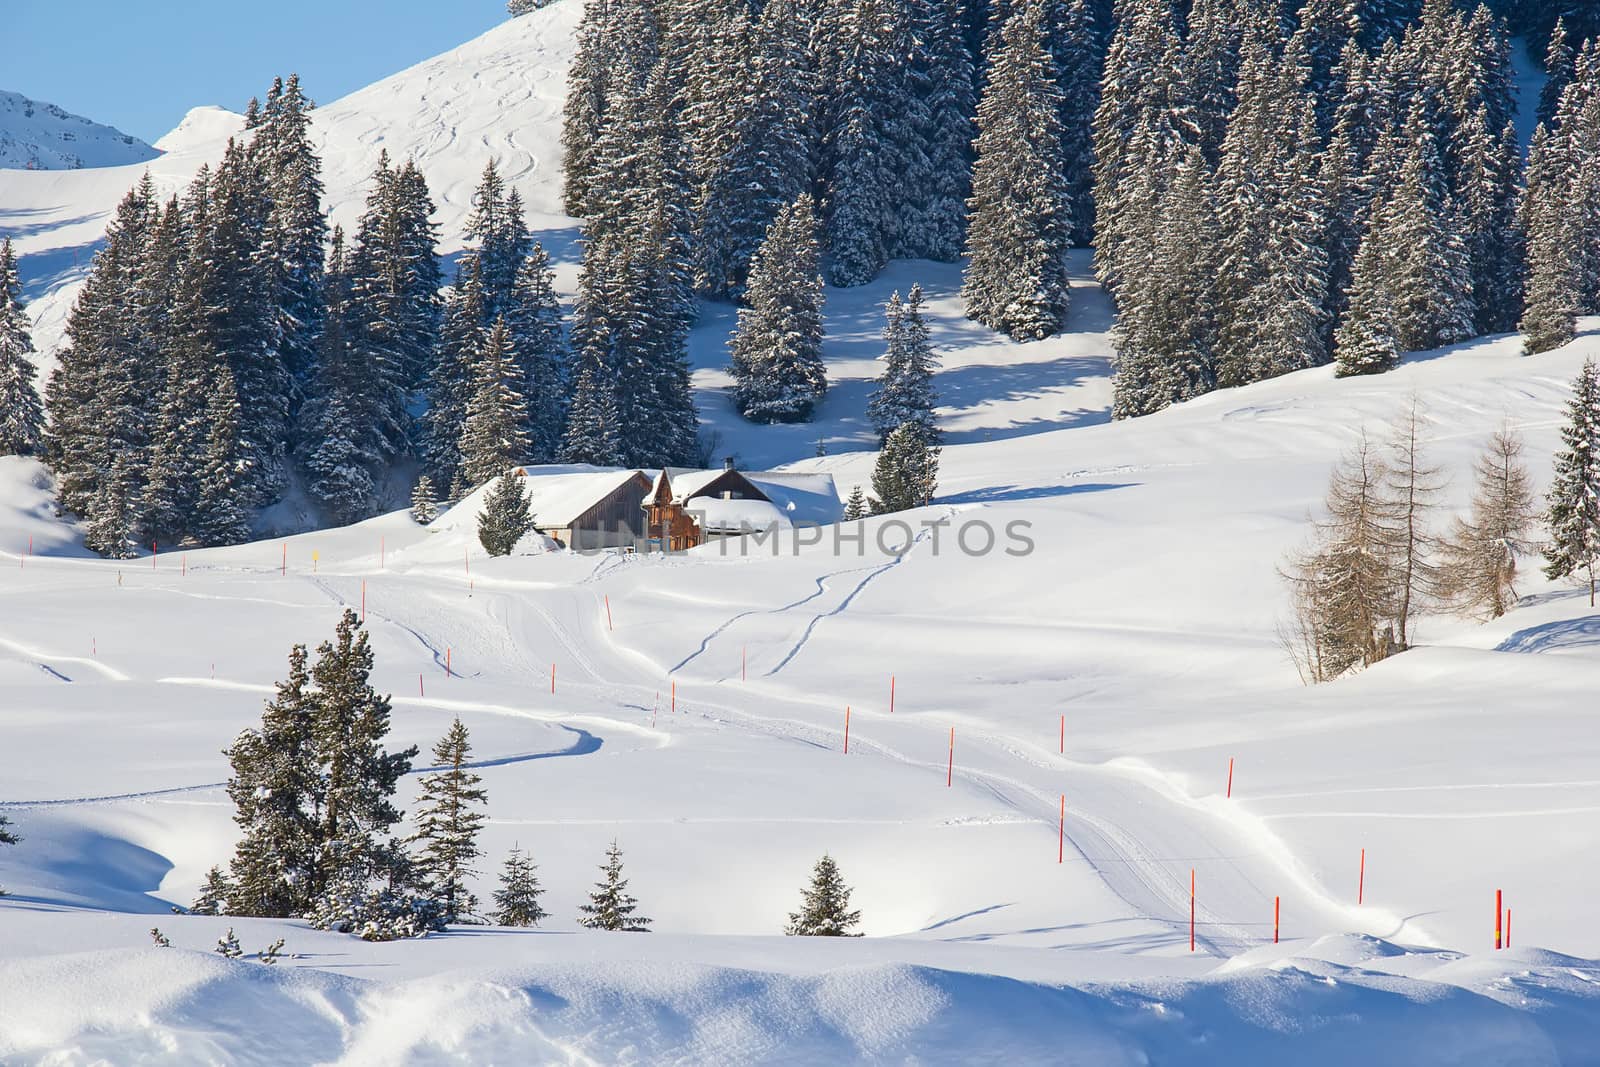 Skiing slope by swisshippo